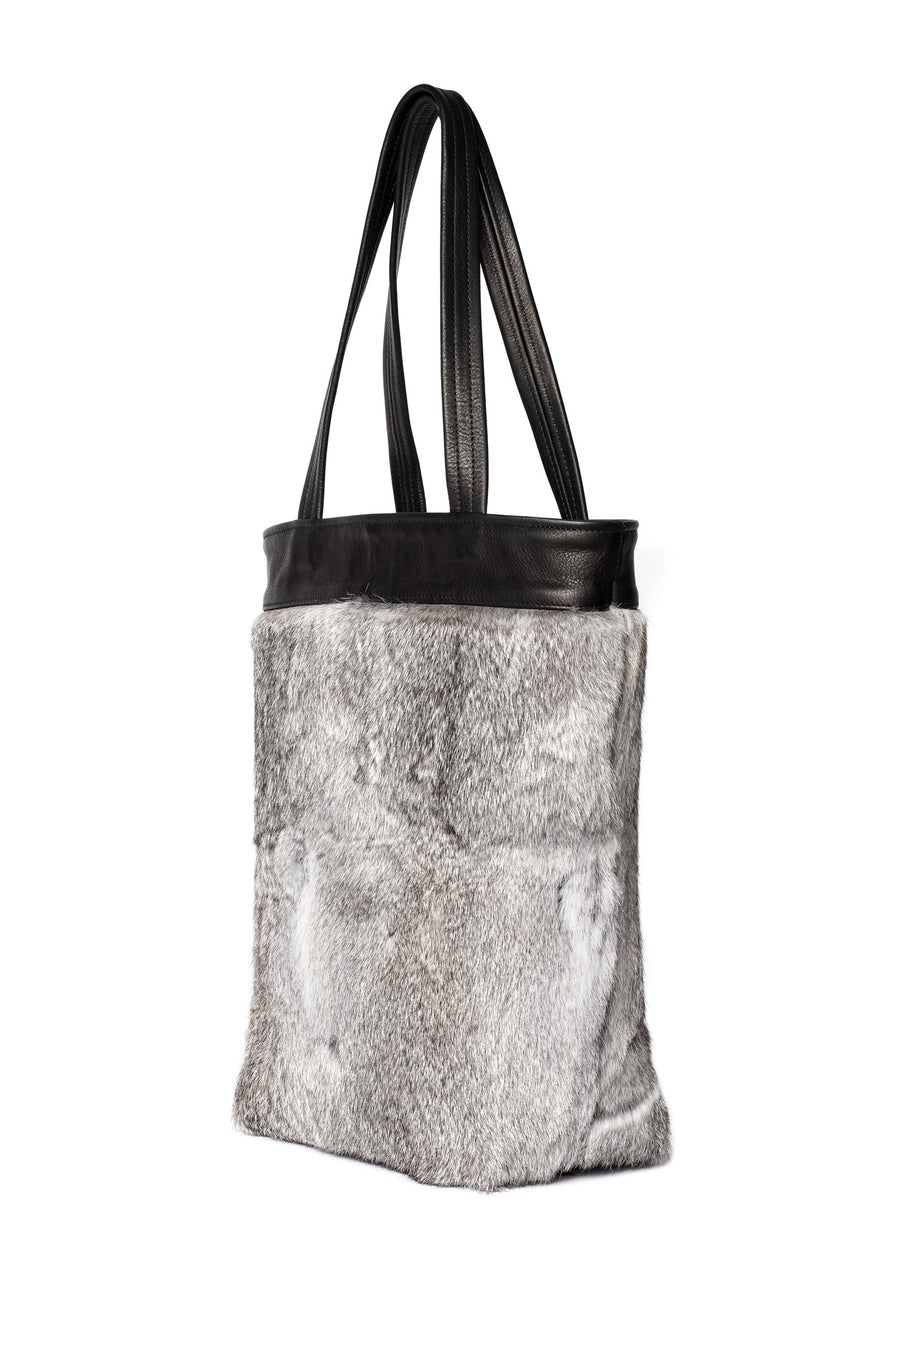 Gray Grey One of a Kind Rabbit Fur Tote Black Leather Wendy Nichol Luxury Handbag Purse Bag Designer handmade in NYC New York City one of a kind Durable Handle strap Interior Pocket High Quality Leather